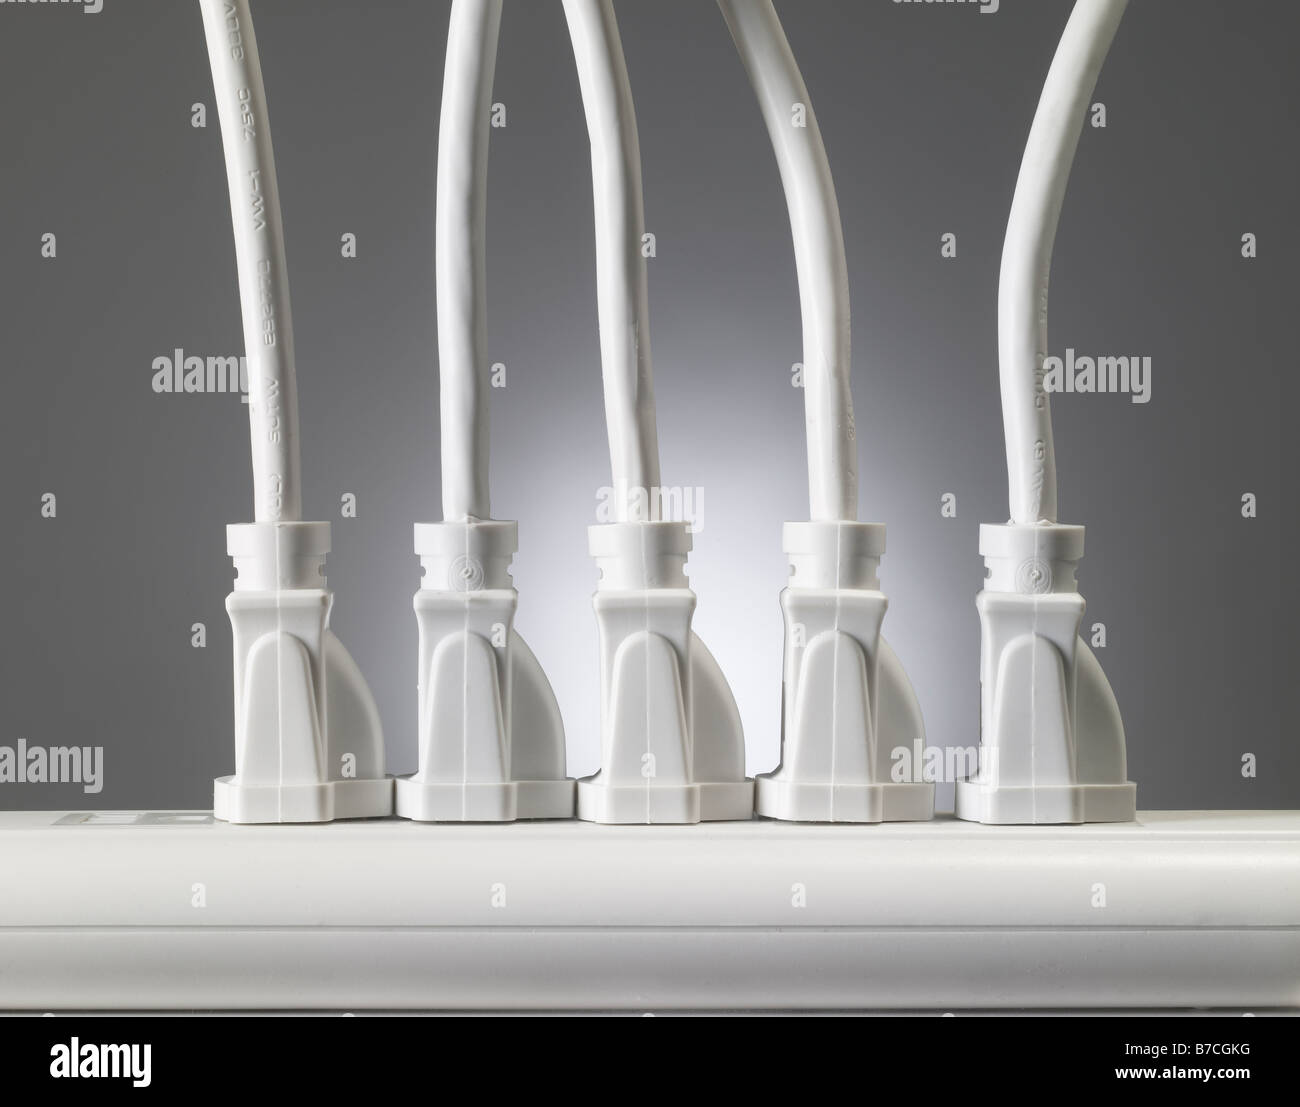 Many Electrical Cords Plugged In To Power Strip Stock Photo